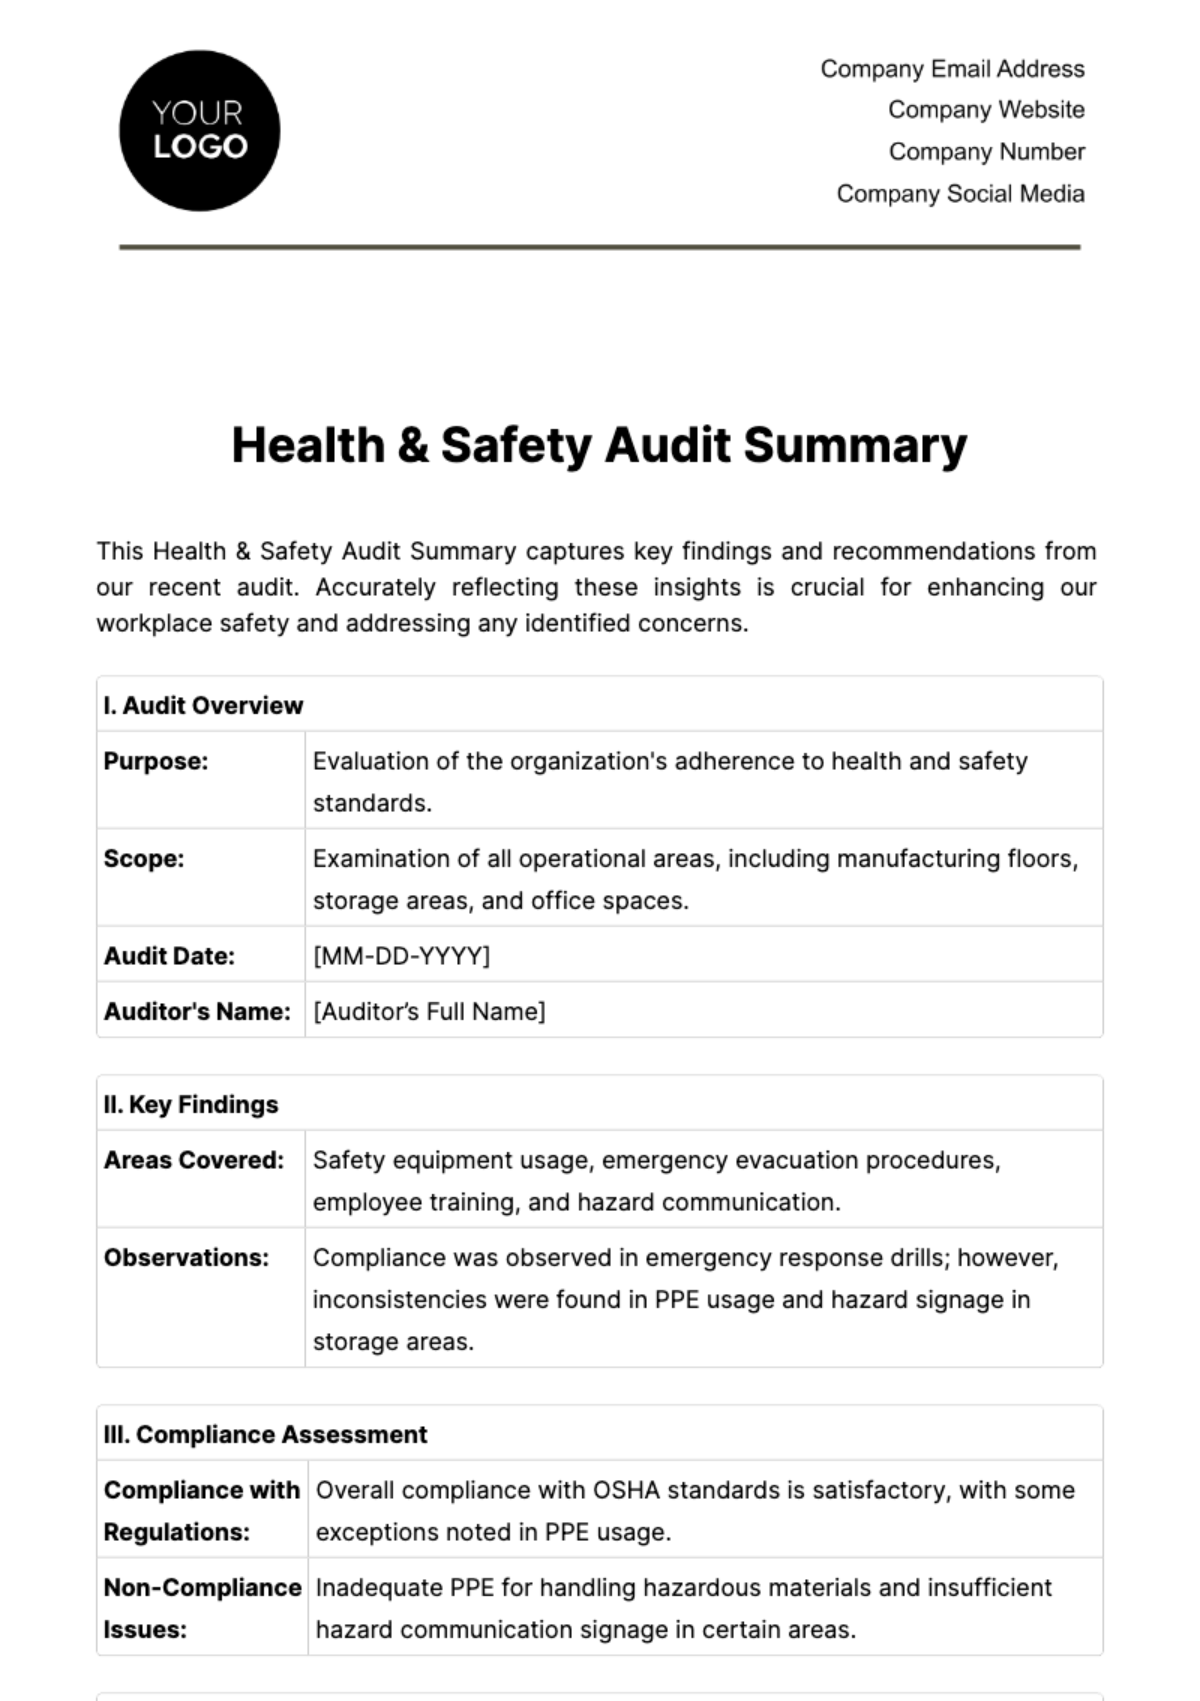 Free Health & Safety Audit Summary Template